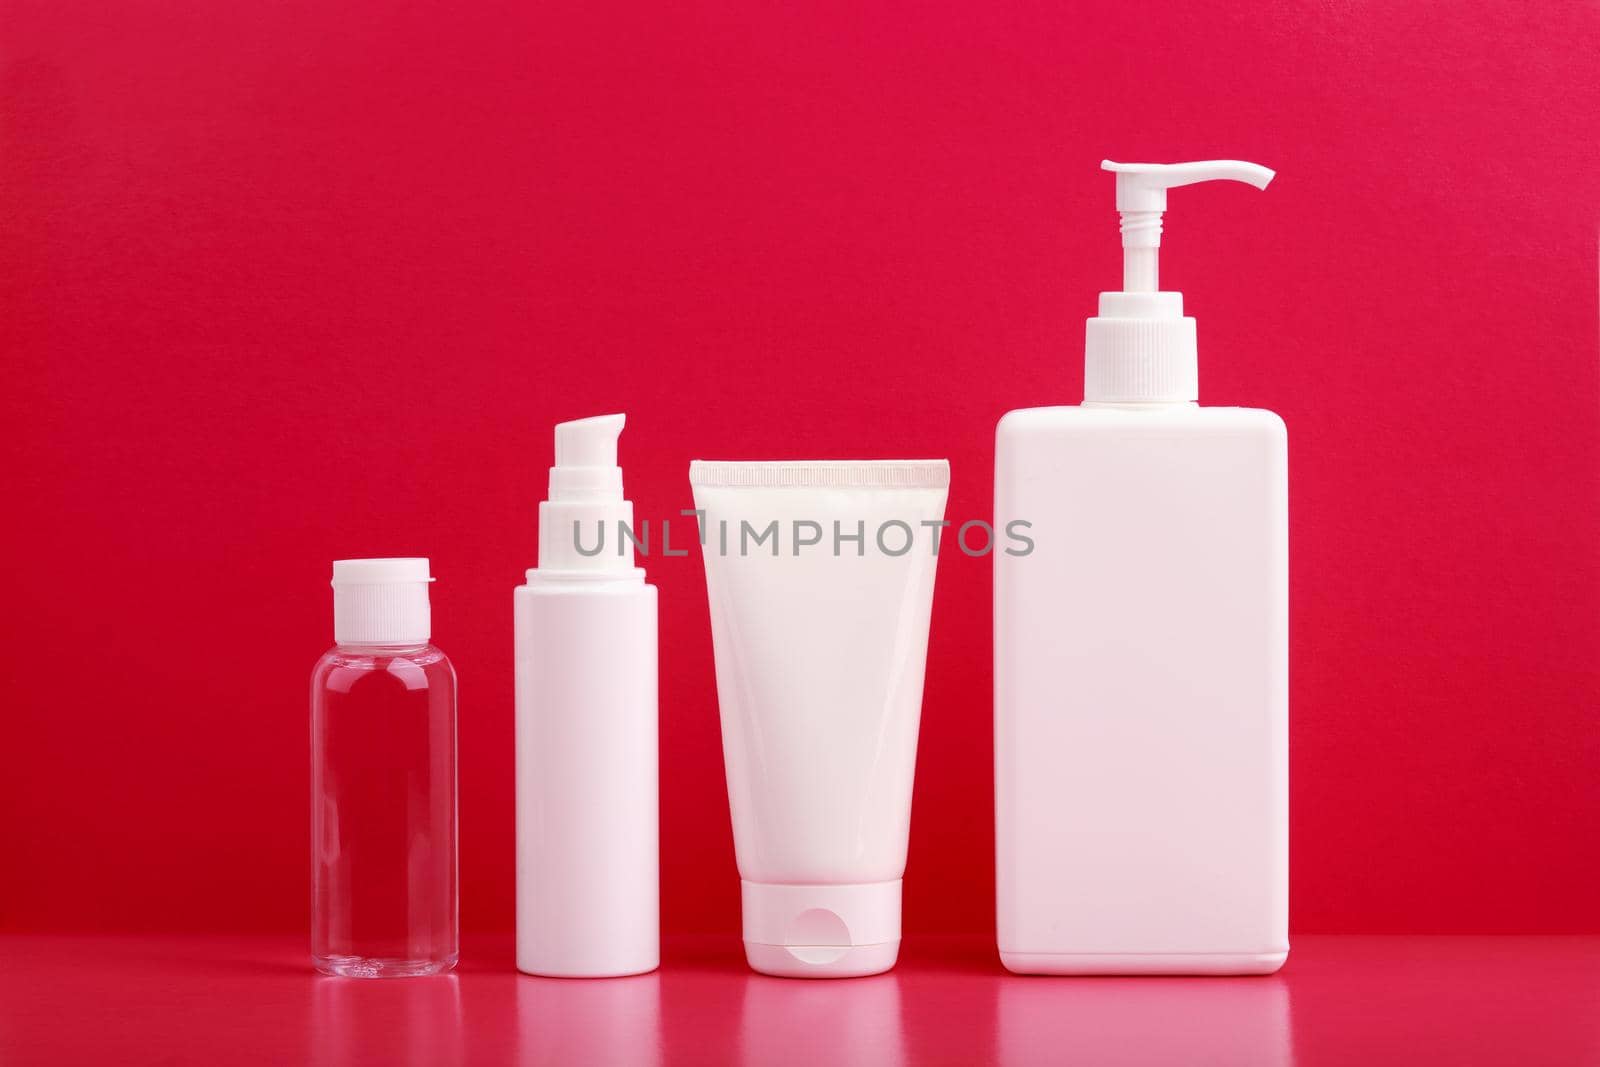 Set of cosmetic for skin care in white tubes on pink table against bright pink background. Concept of beauty treatment and skin care products for daily skin cleaning and moisturizing